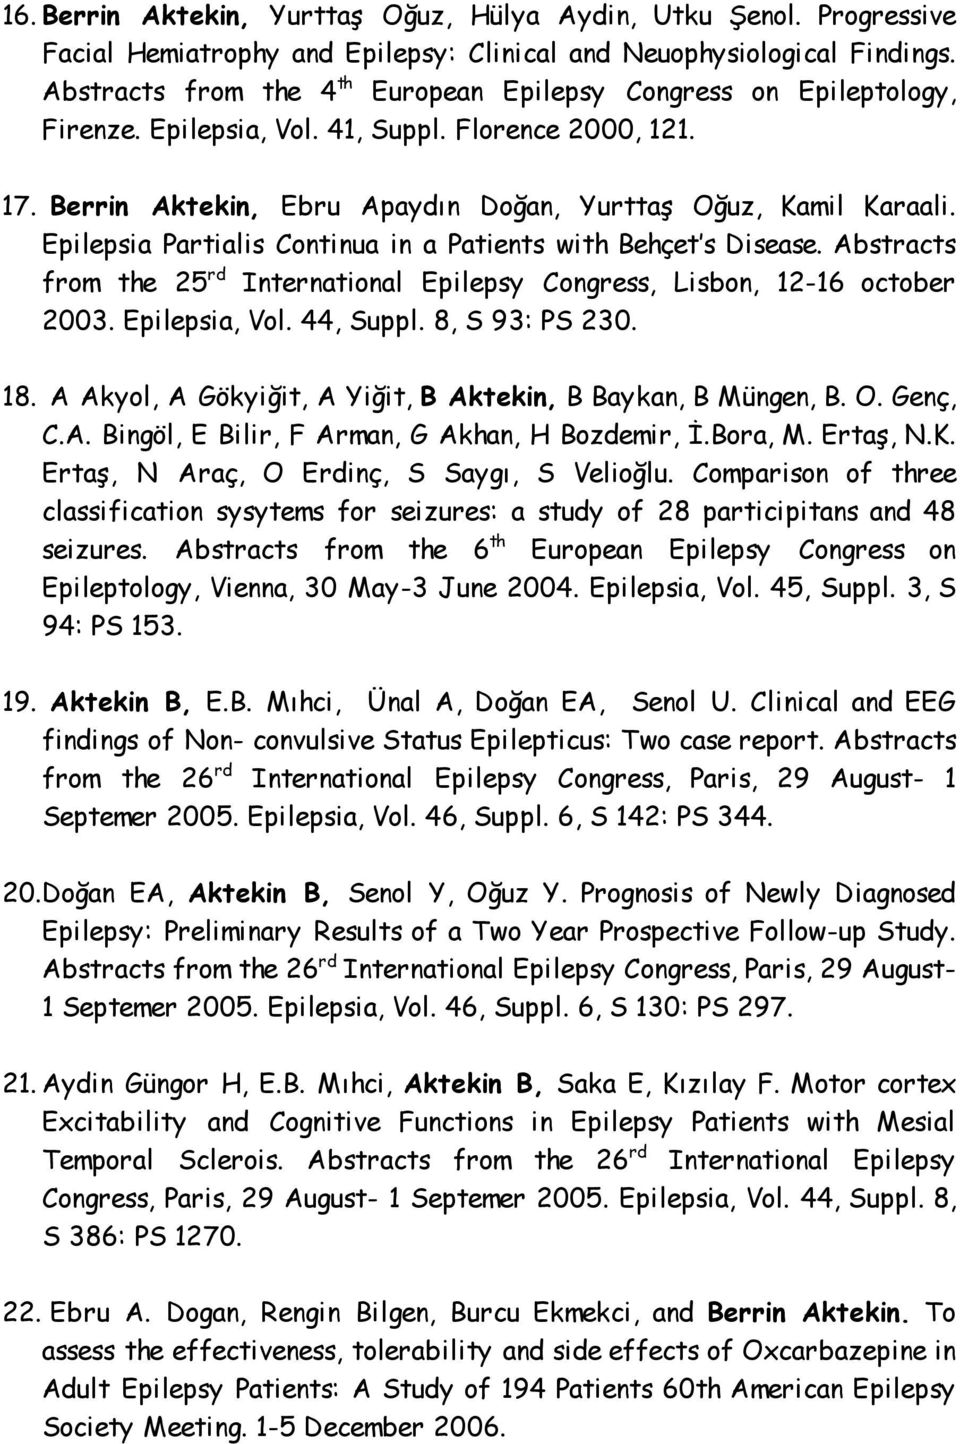 Epilepsia Partialis Continua in a Patients with Behçet s Disease. Abstracts from the 25 rd International Epilepsy Congress, Lisbon, 12-16 october 2003. Epilepsia, Vol. 44, Suppl. 8, S 93: PS 230. 18.